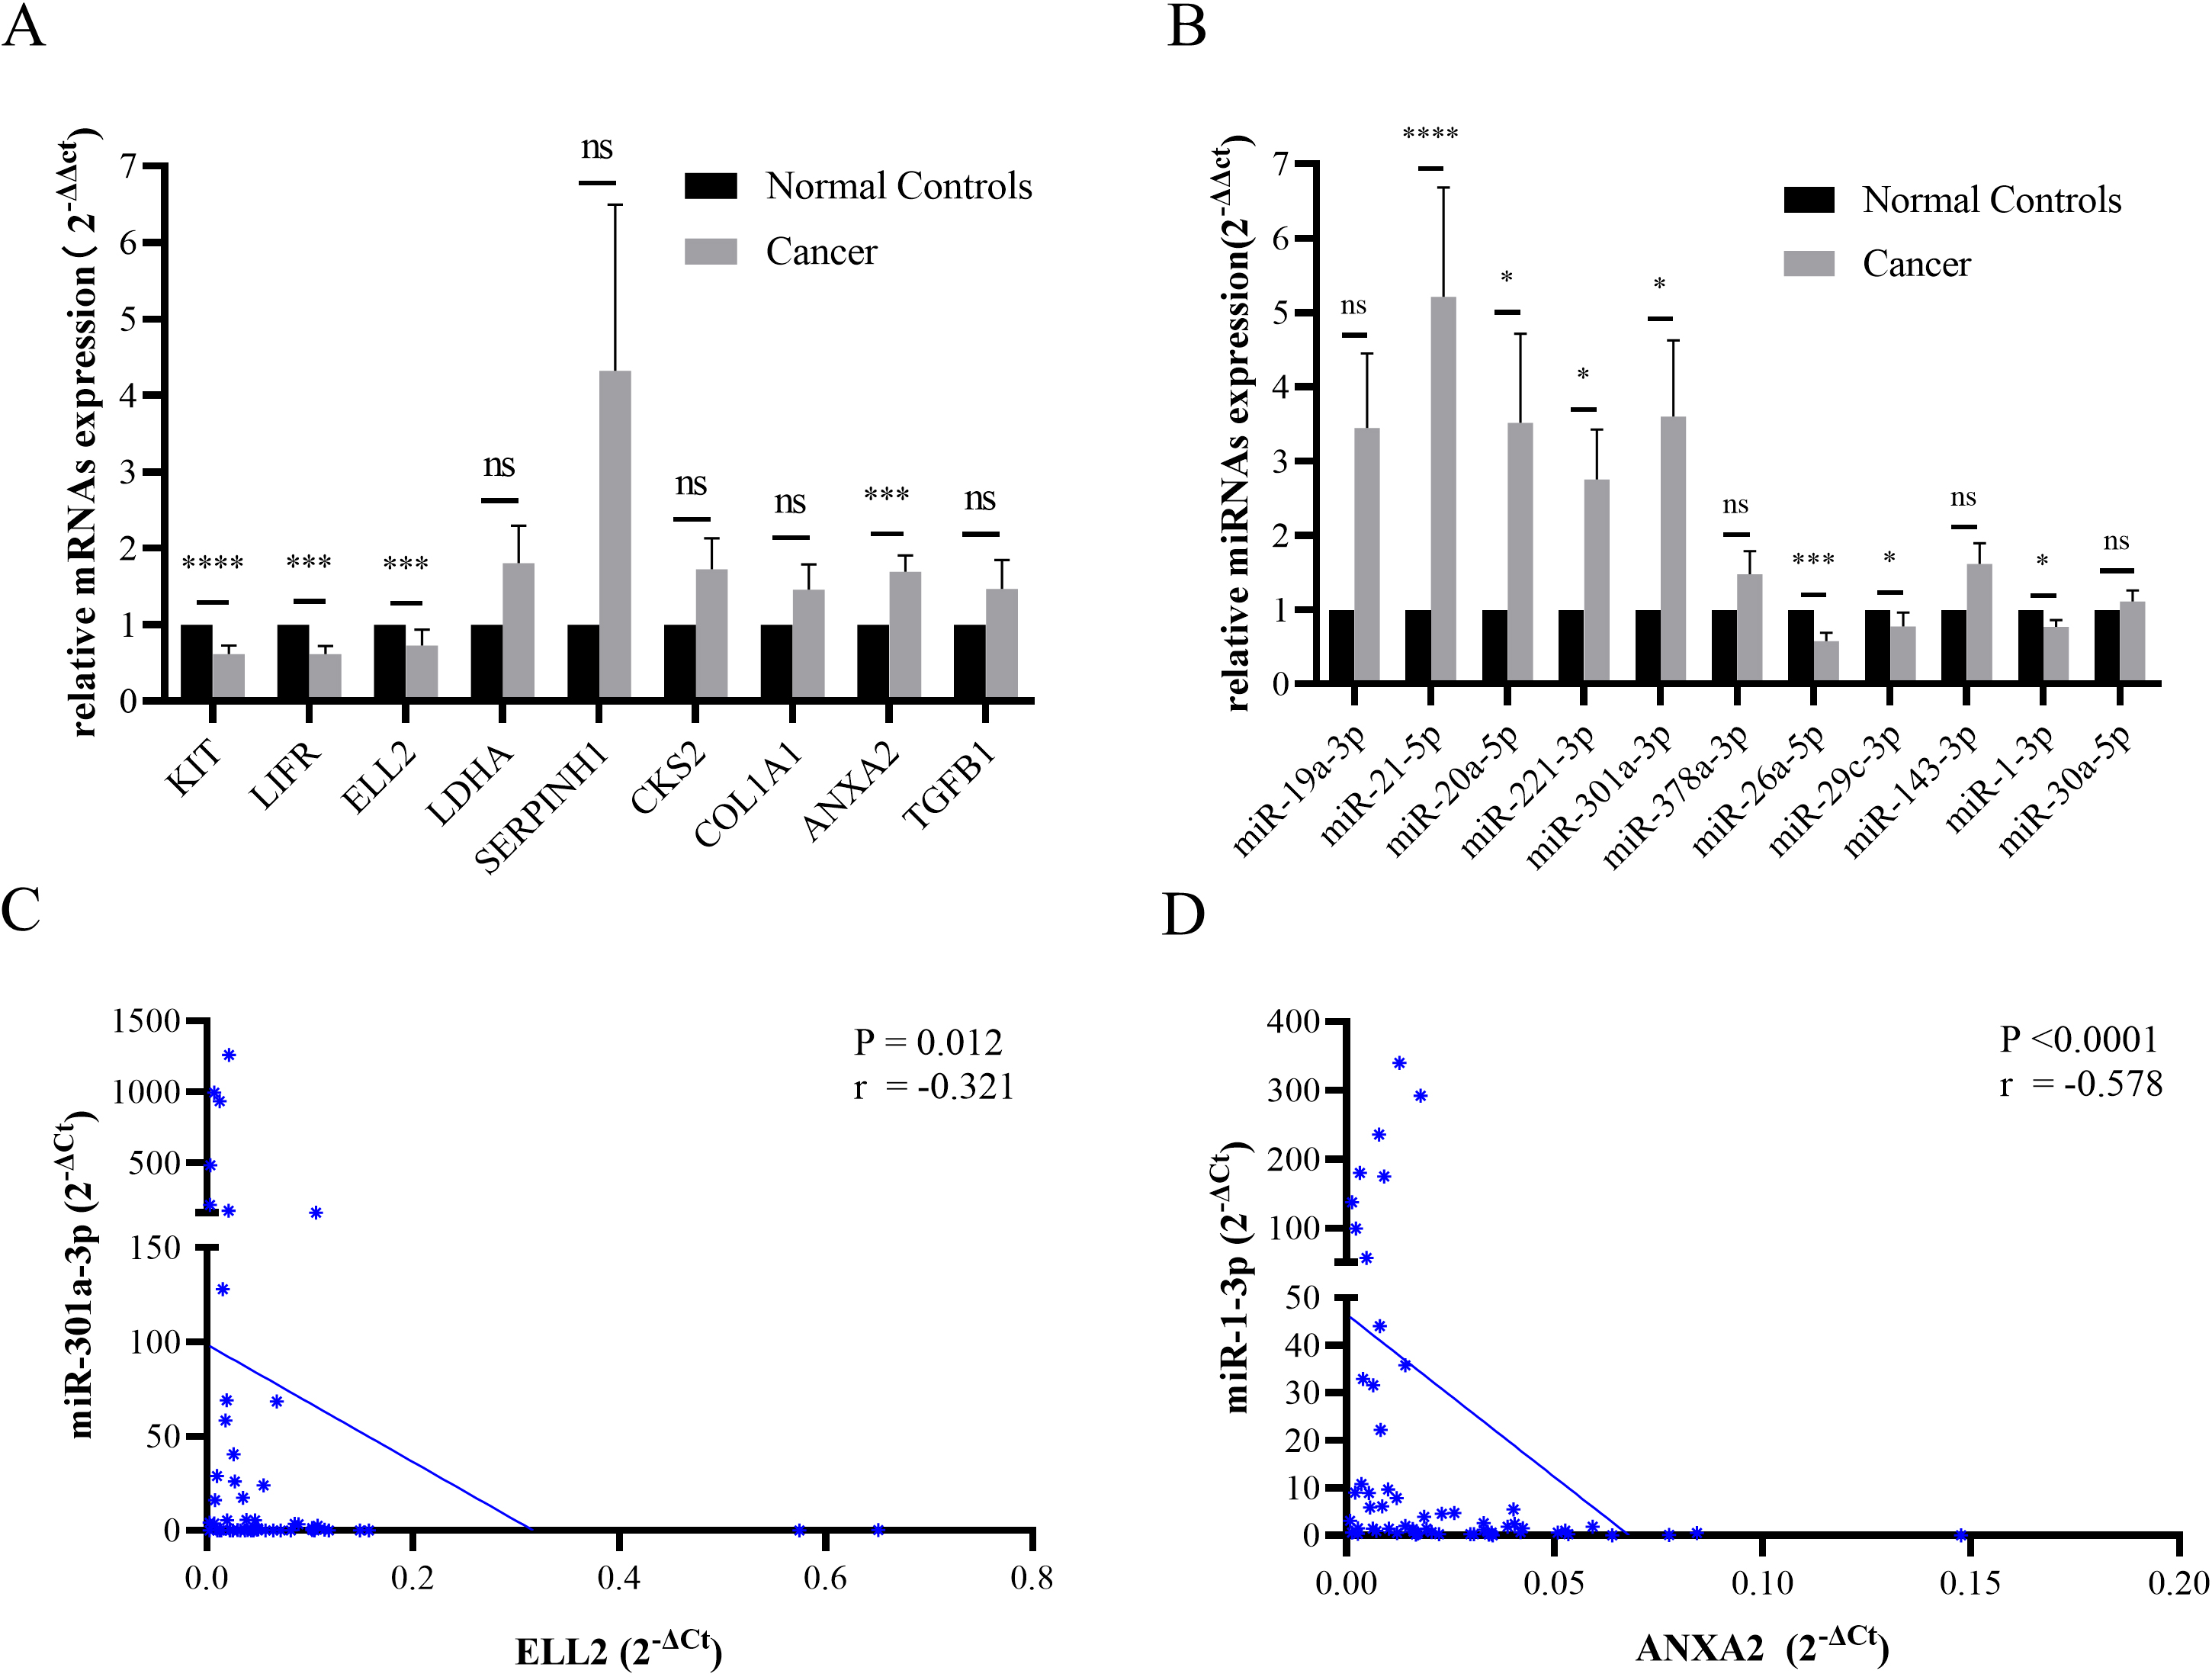 (A) The expression levels of KIT, LIFR, and ELL2 declined in STAD tissues. ANXA2 was overexpressed in tumor samples. (B) The miRNA expression level of miR-21-5p, miR-20a-5p, miR-221-3p, and miR-301a-3p were increased in STAD specimen. MiR-26a-5p, miR-29c-3p, and miR-1-3p were down regulated in STAD tissues. Data were presented as mean ± SEM. *p < 0.05, **p < 0.01, ***p < 0.001 and ****p < 0.0001 (Wilcoxon rank sum test). (C and D) The networks of miR-1-3p (down)/ANXA2 (up) and miR-301a-3p (up)/ELL2 (down) were the negatively regulated pairs verified via RT-qPCR.